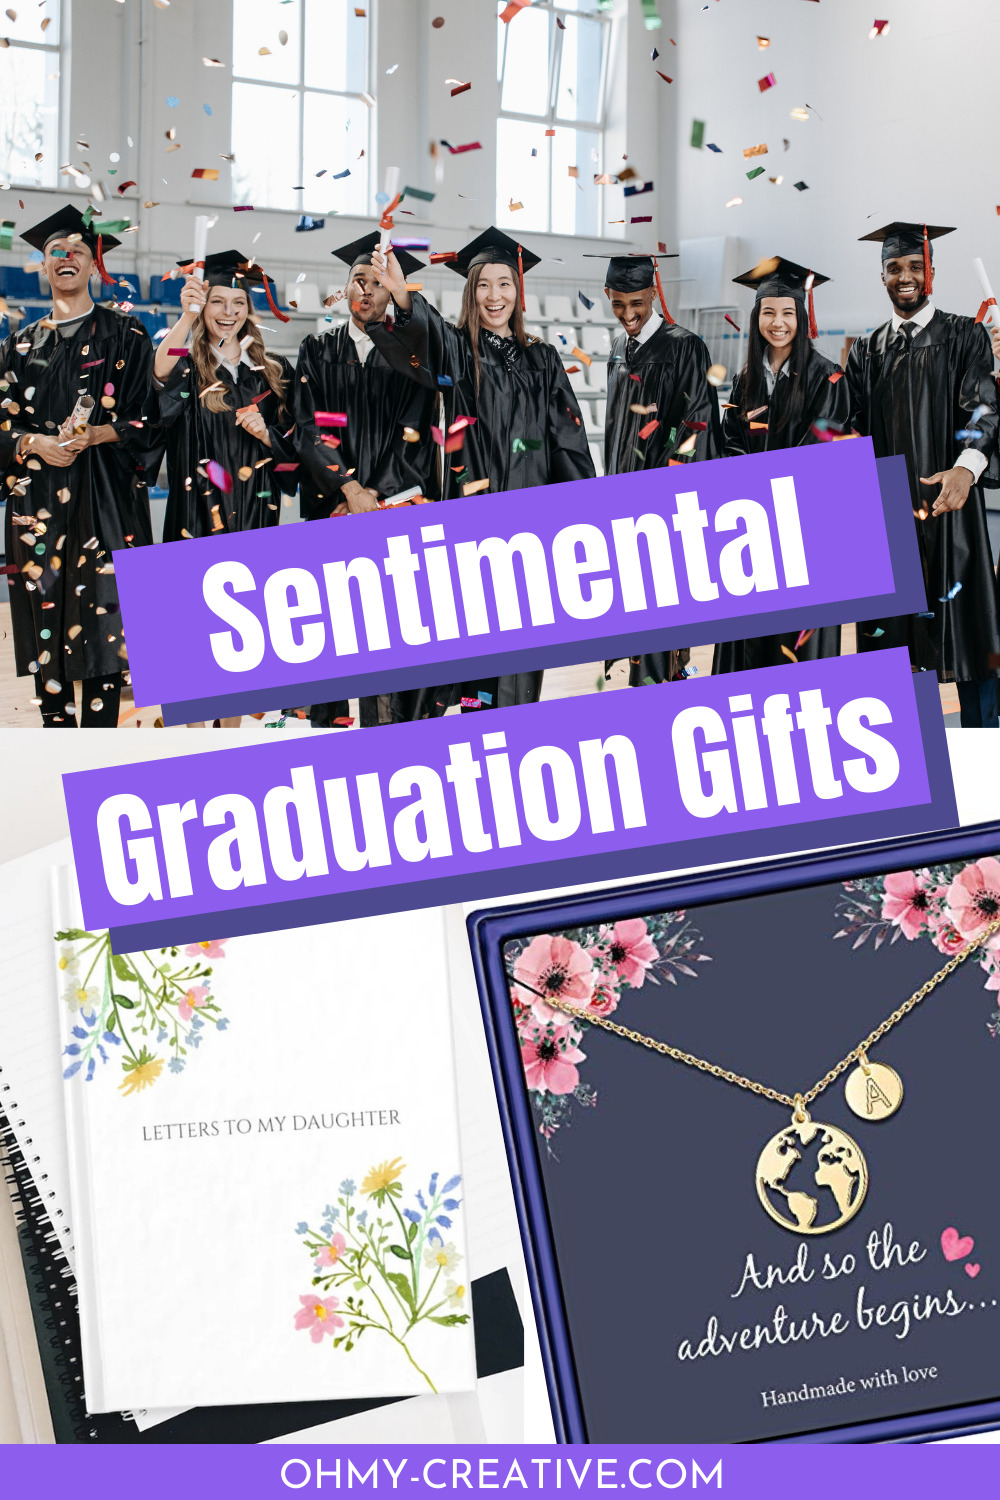 A collage of grads celebrating along with a few sentimental graduation gifts.